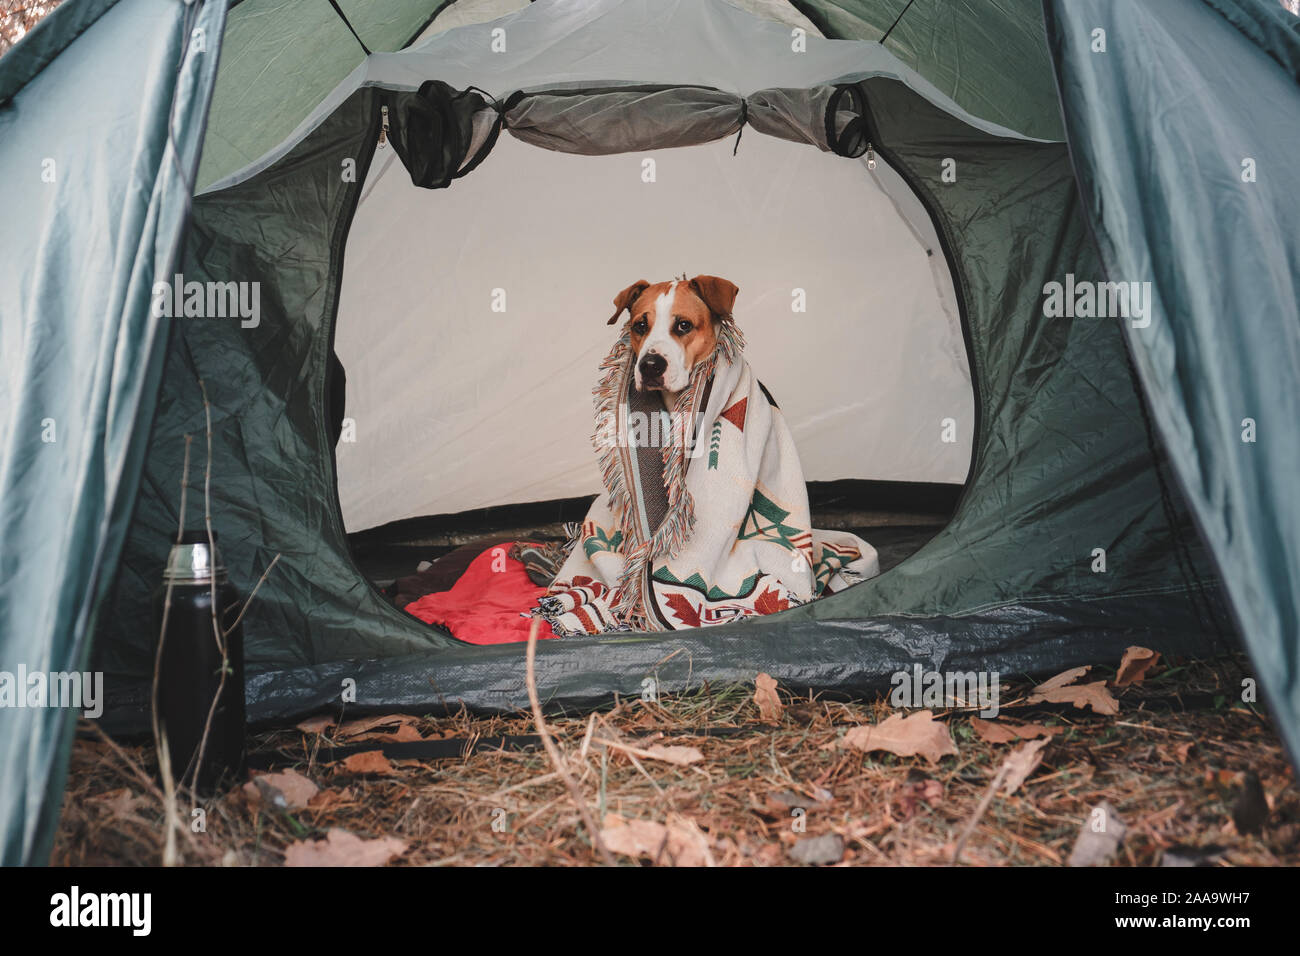 Funny and serious dog in blanket inside a tent. Camping and hiking with pets: staffordshire terrier posing in a tent on a chilly autumn day Stock Photo